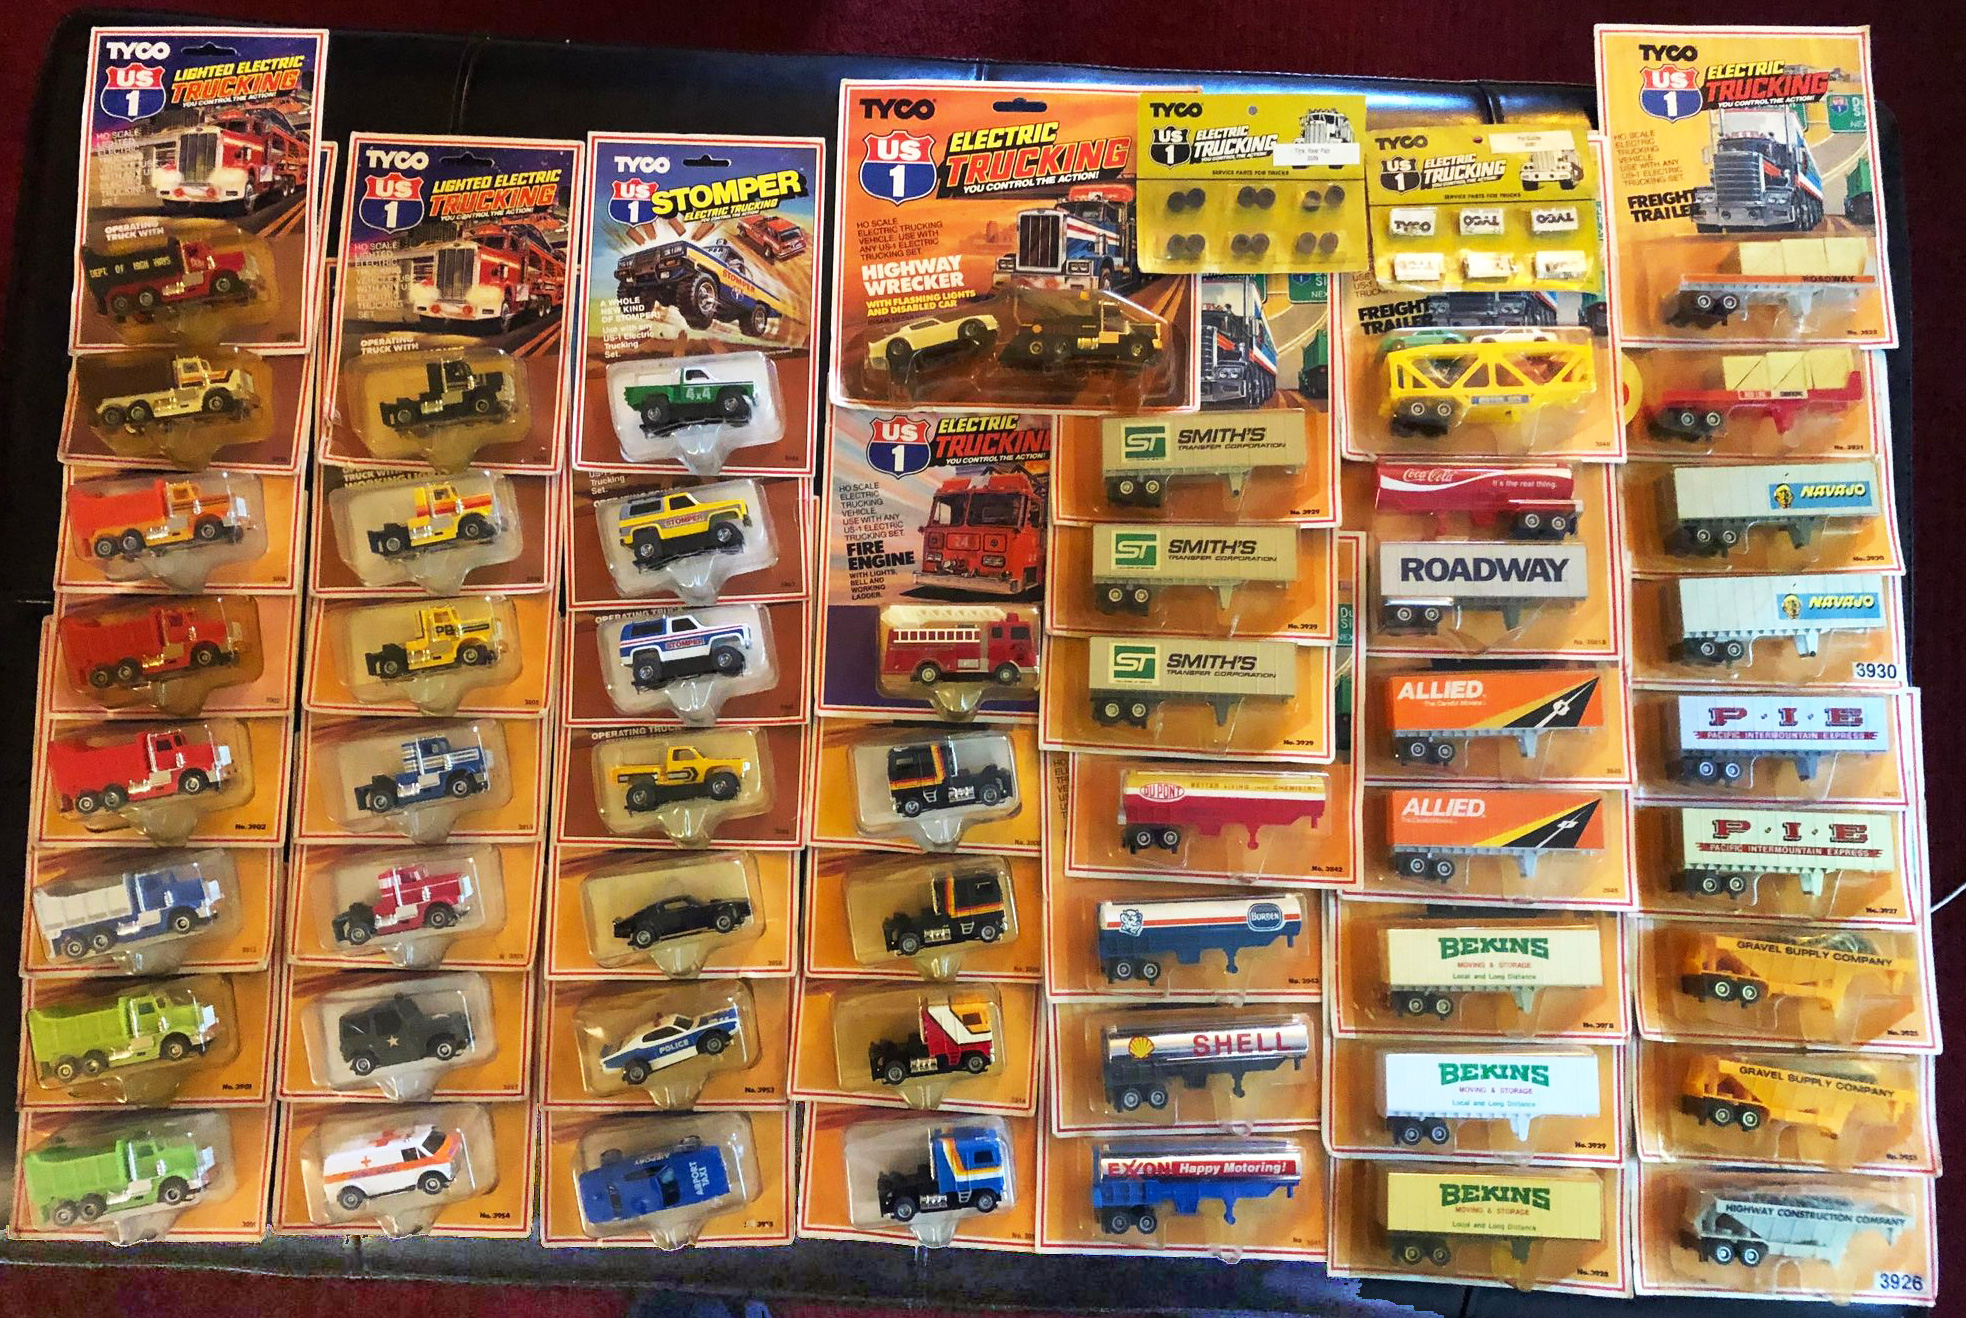 Huge Lot of TYCO US1 Electric Trucking vehicles on NOC